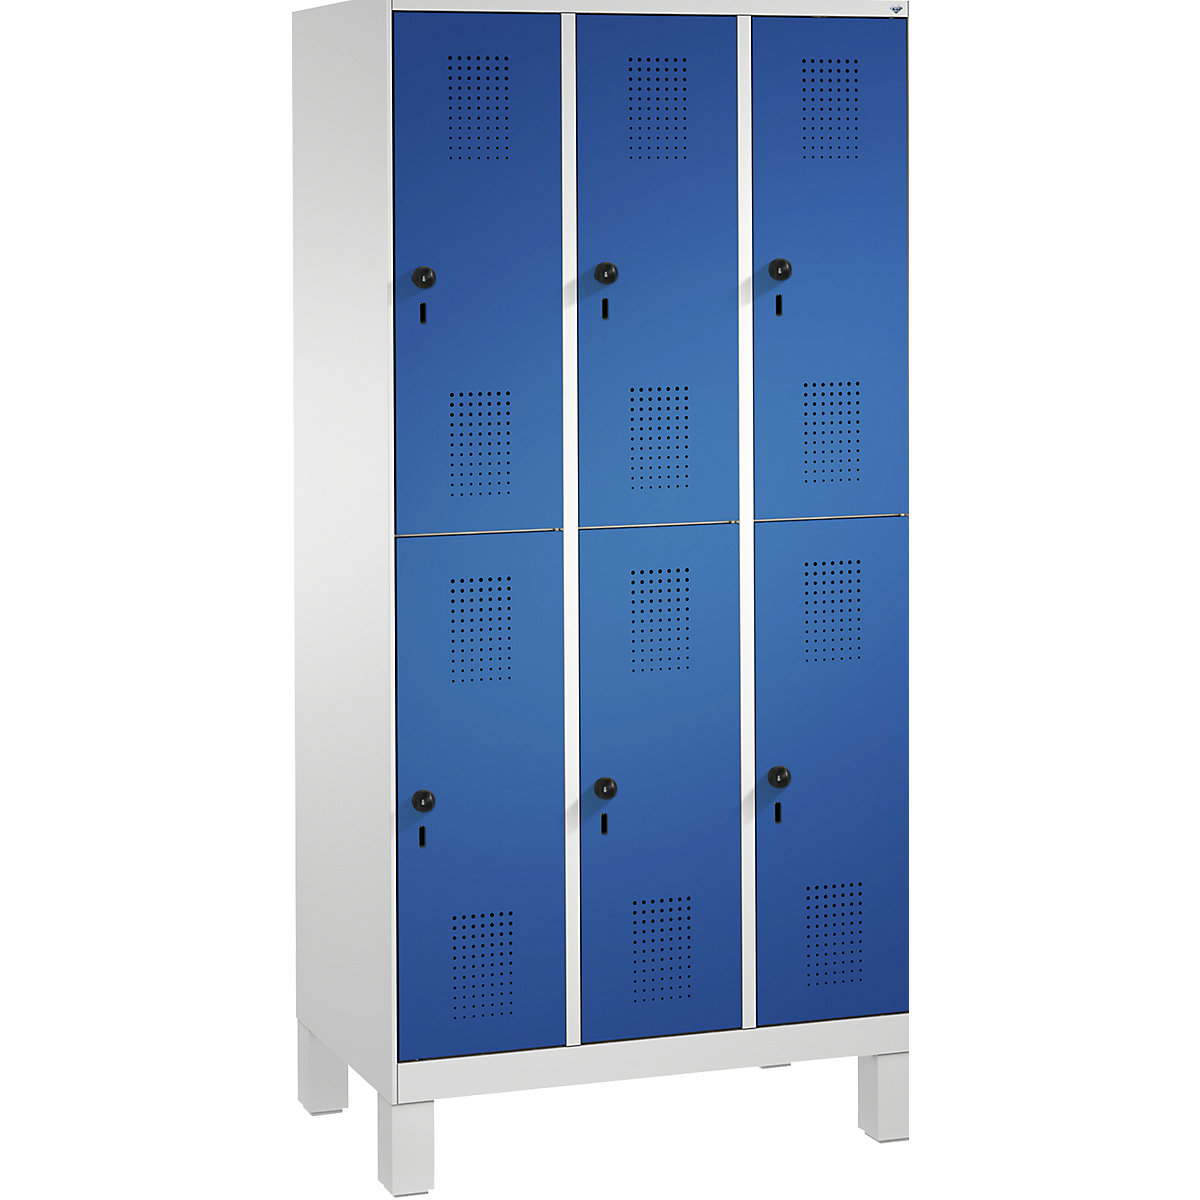 EVOLO cloakroom locker, double tier, with feet – C+P, 3 compartments, 2 shelf compartments each, compartment width 300 mm, light grey / gentian blue-2